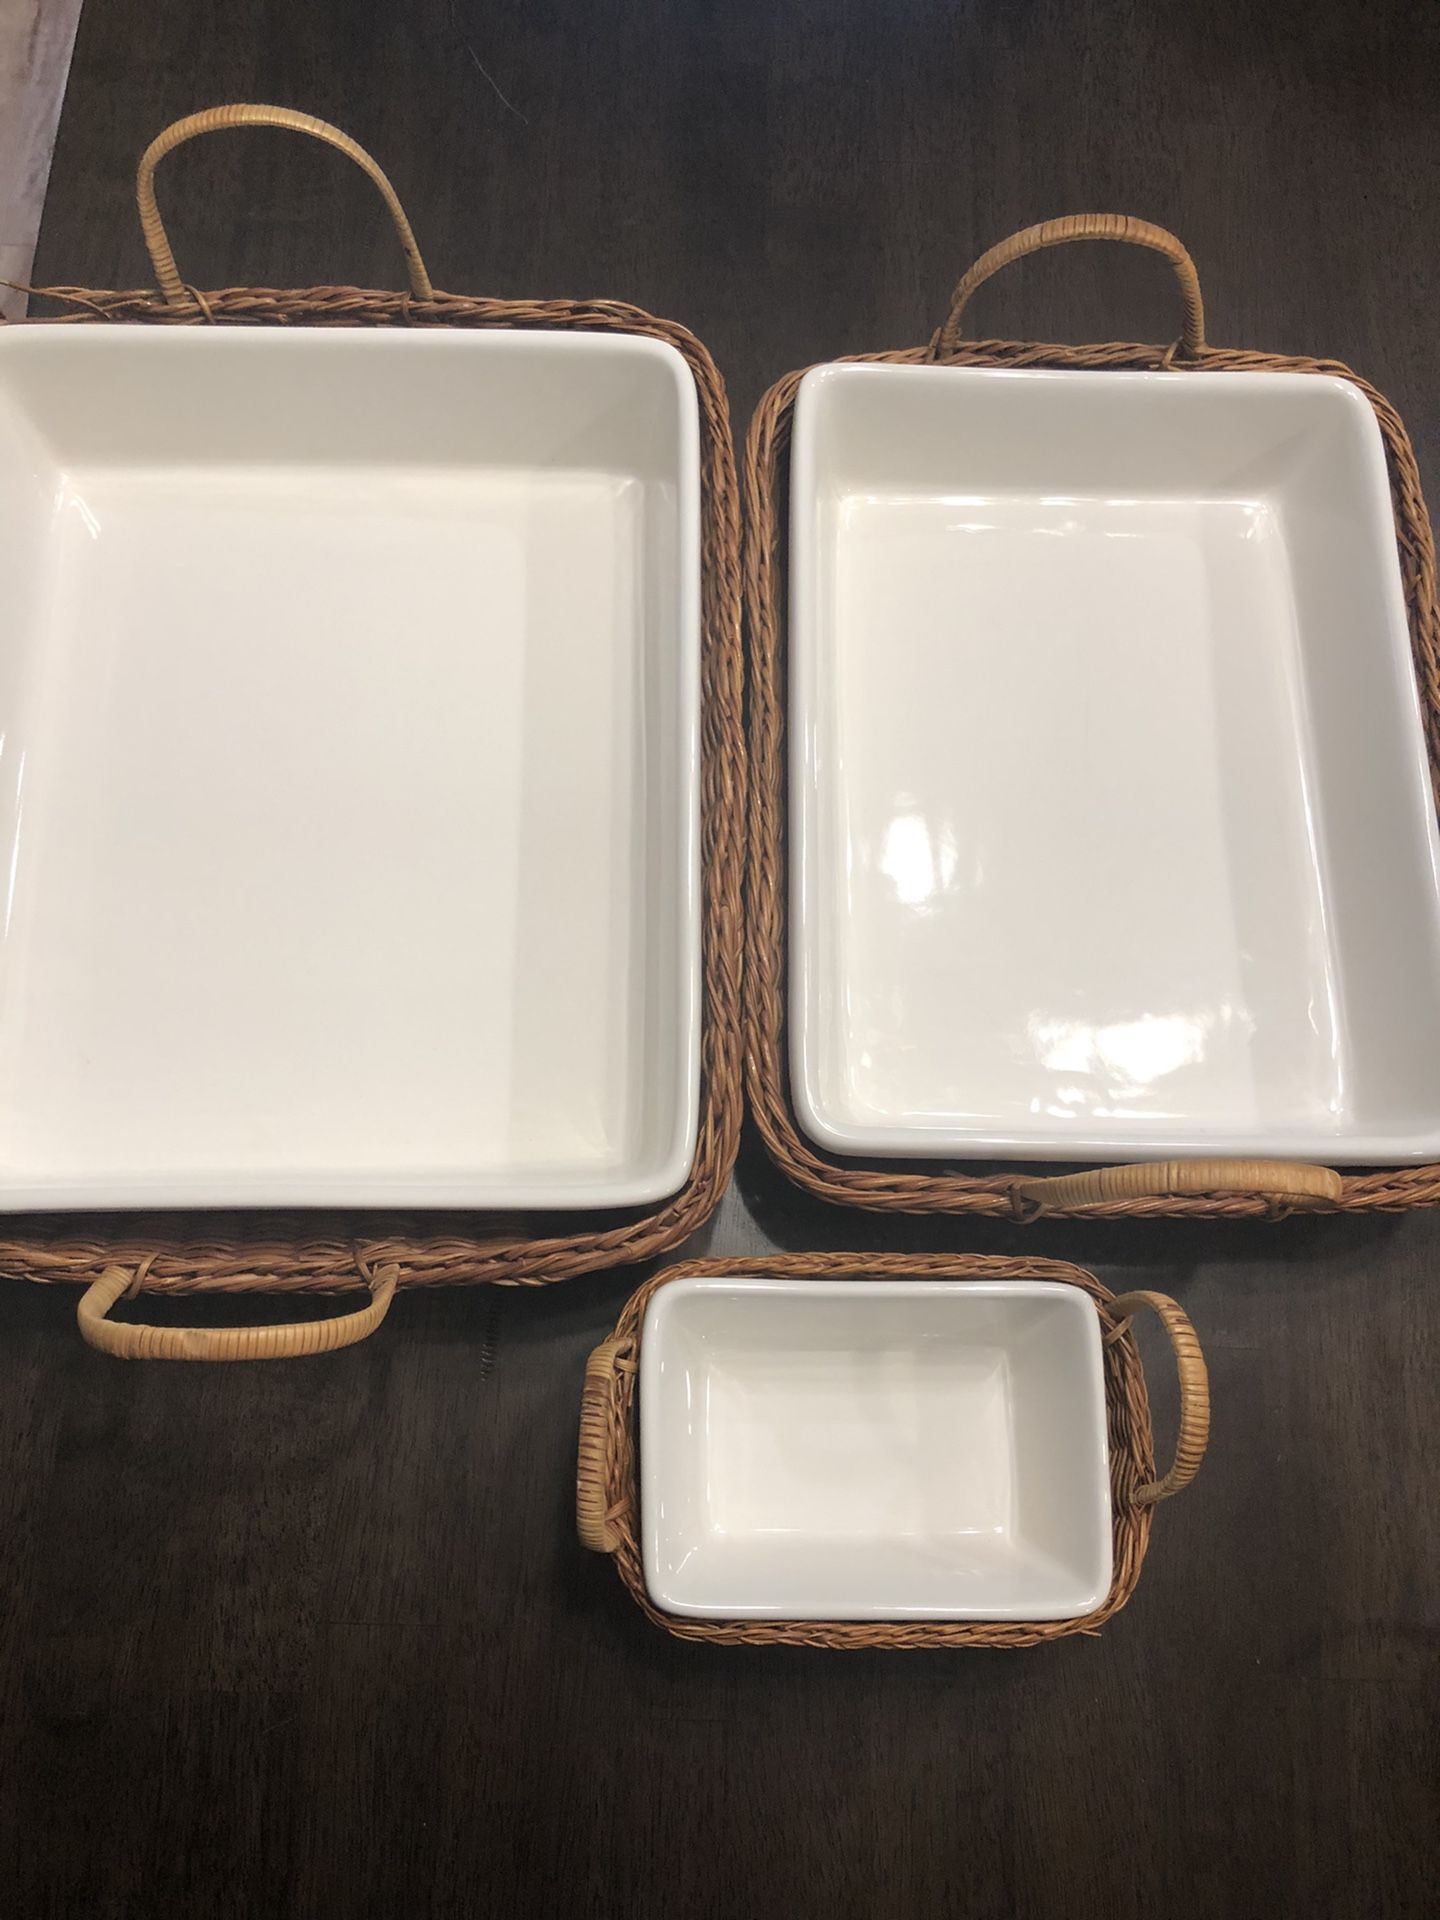 Baking Dishes With Baskets 